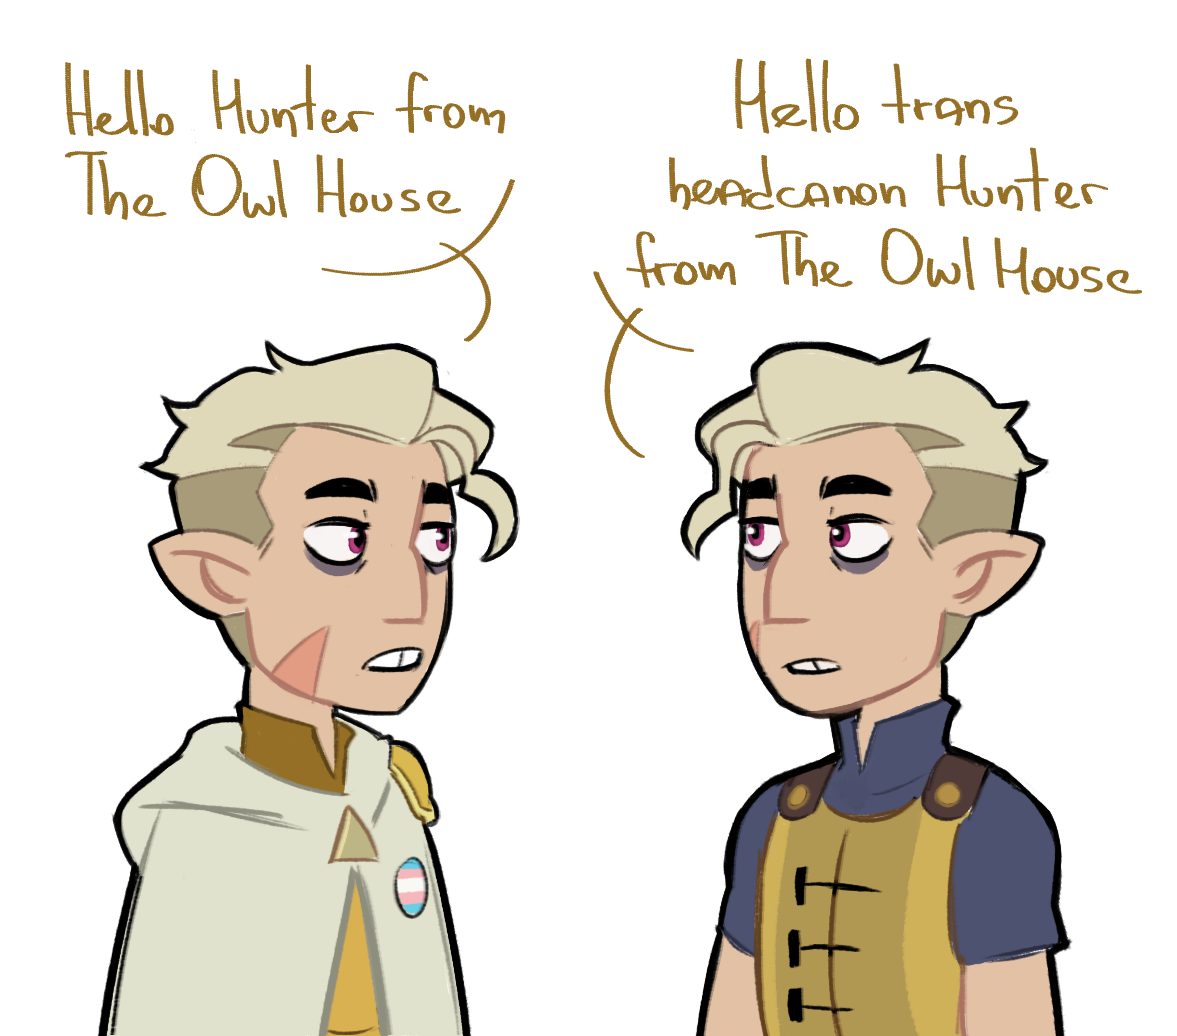 Is hunter trans the owl house